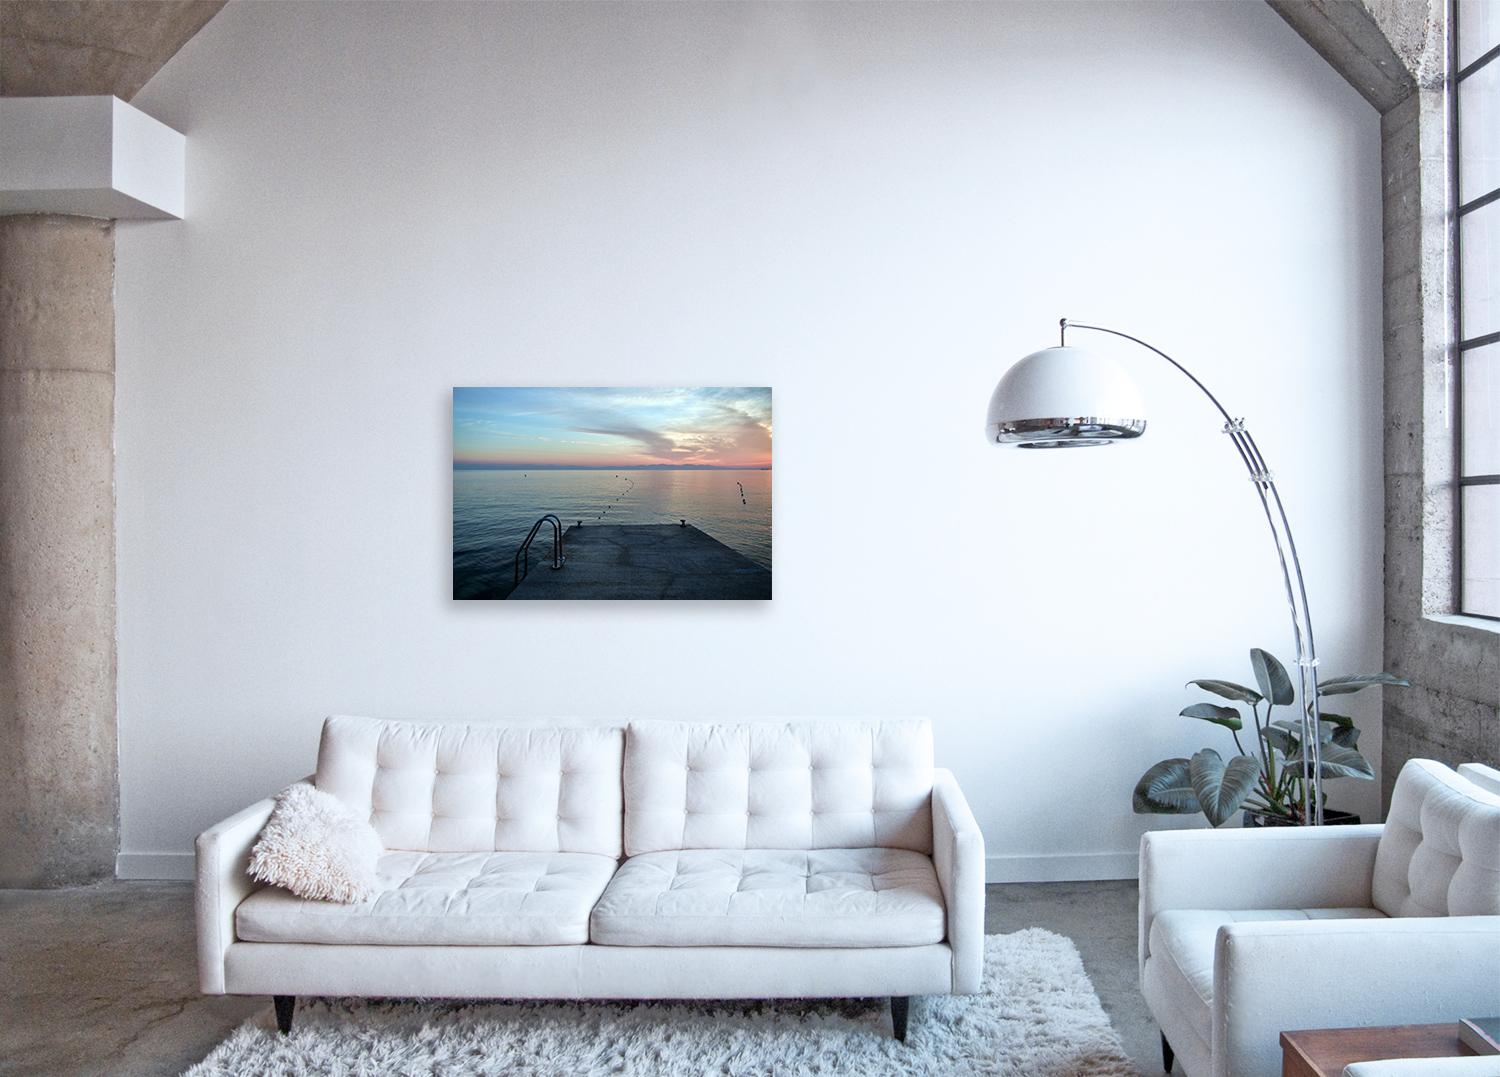 Mediterranean Dip - large format photograph of ethereal sunset and surfaces - Contemporary Photograph by Frank Schott